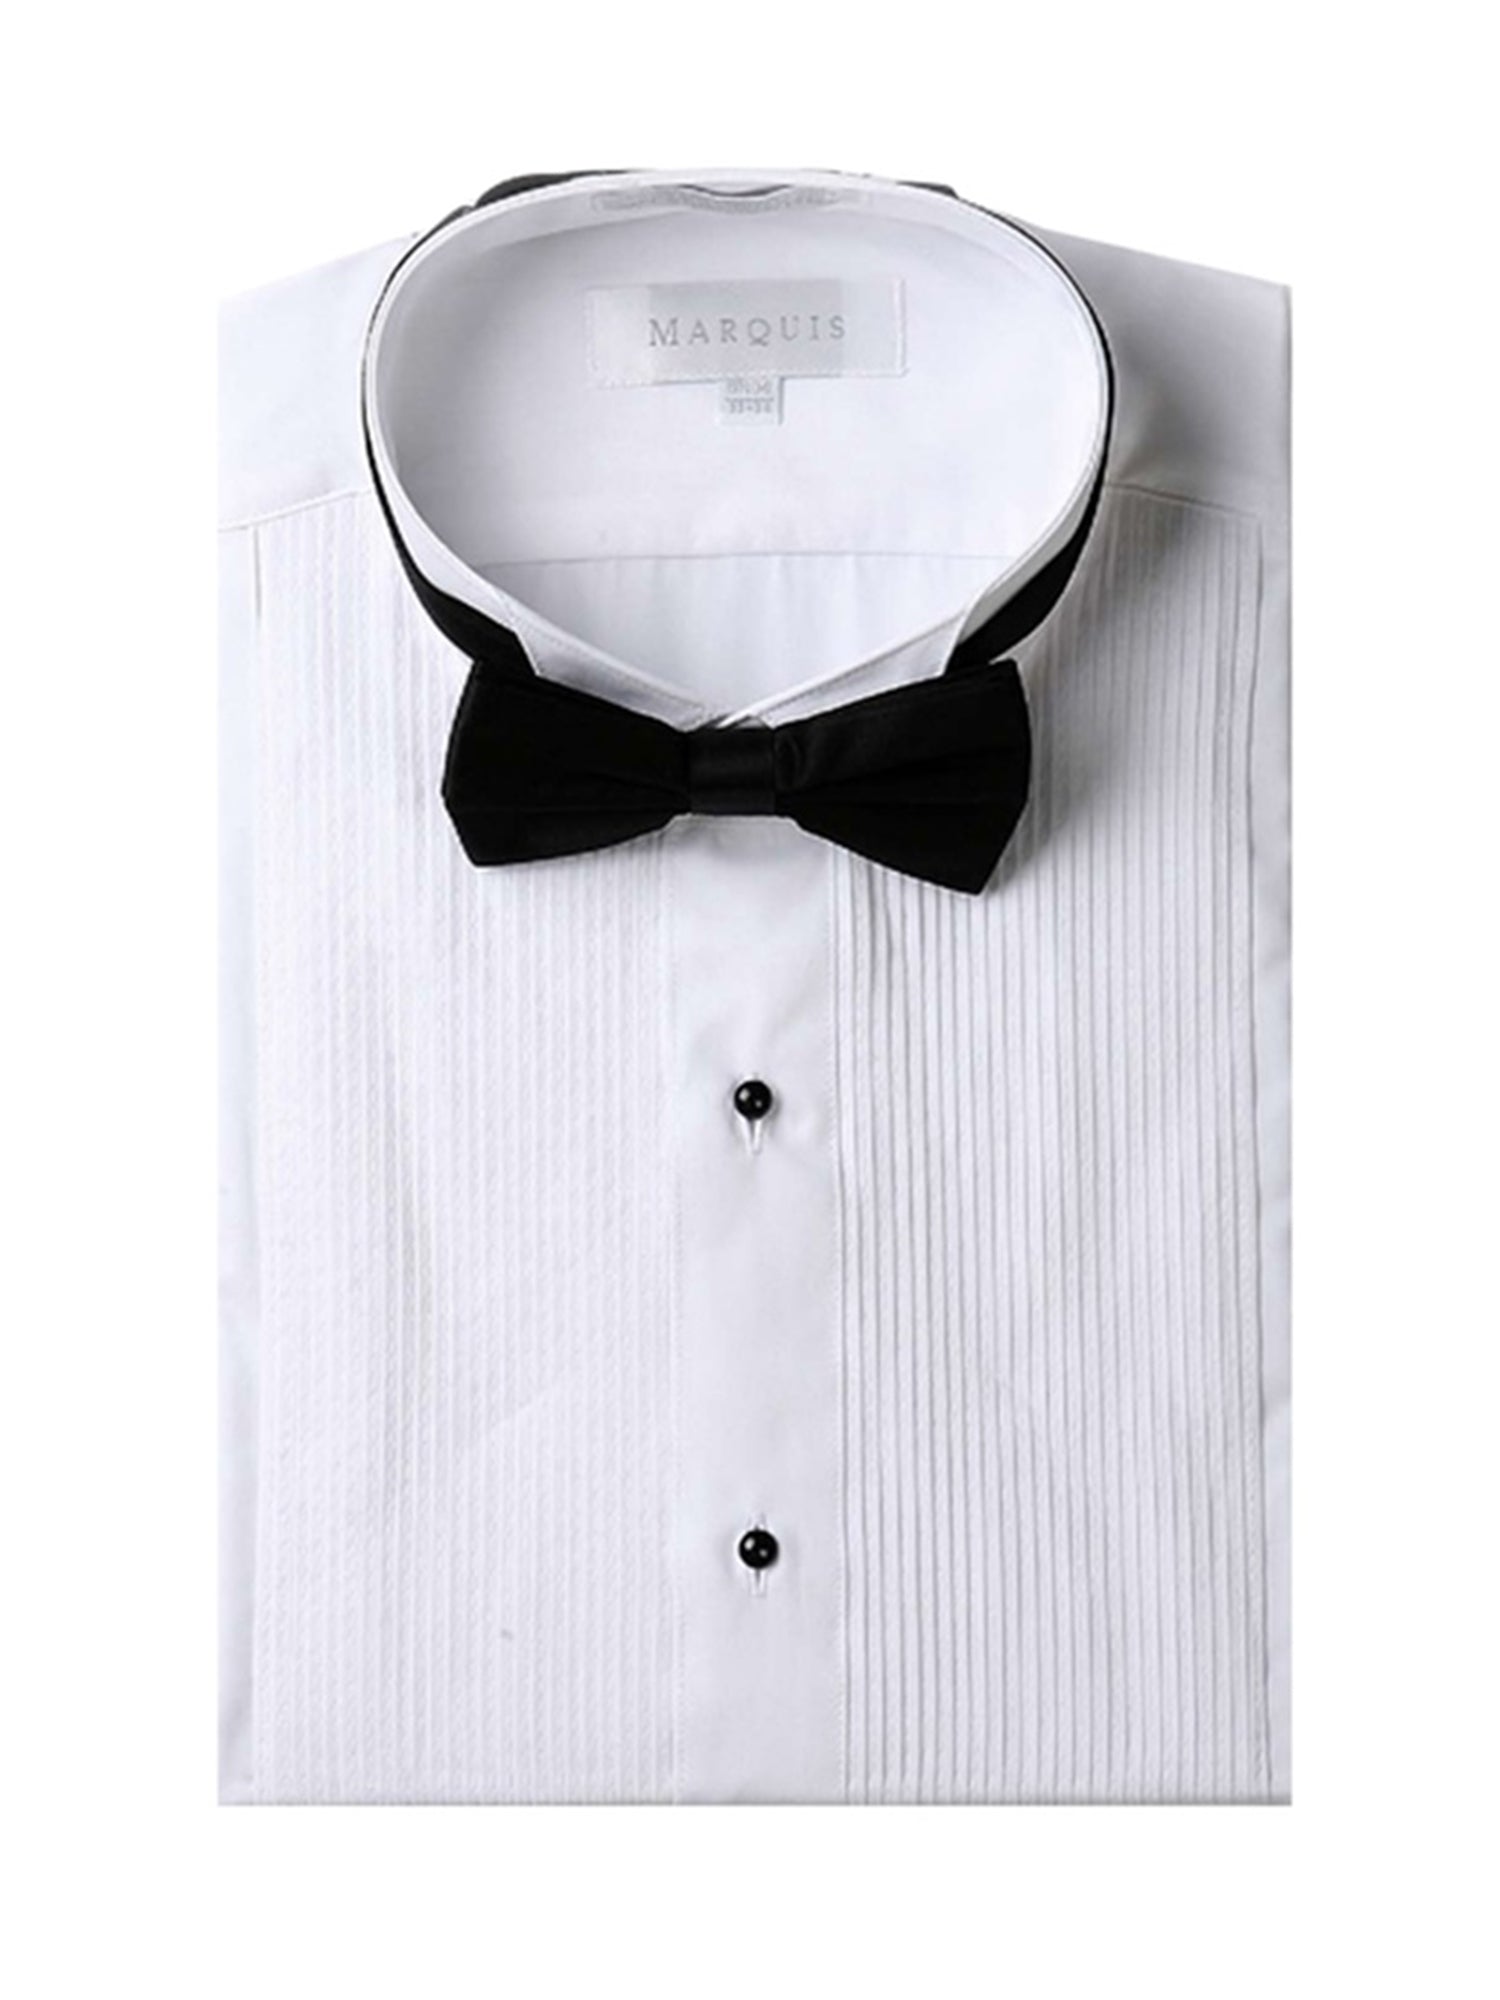 Tailored Fit Dress Shirt with Bow Tie